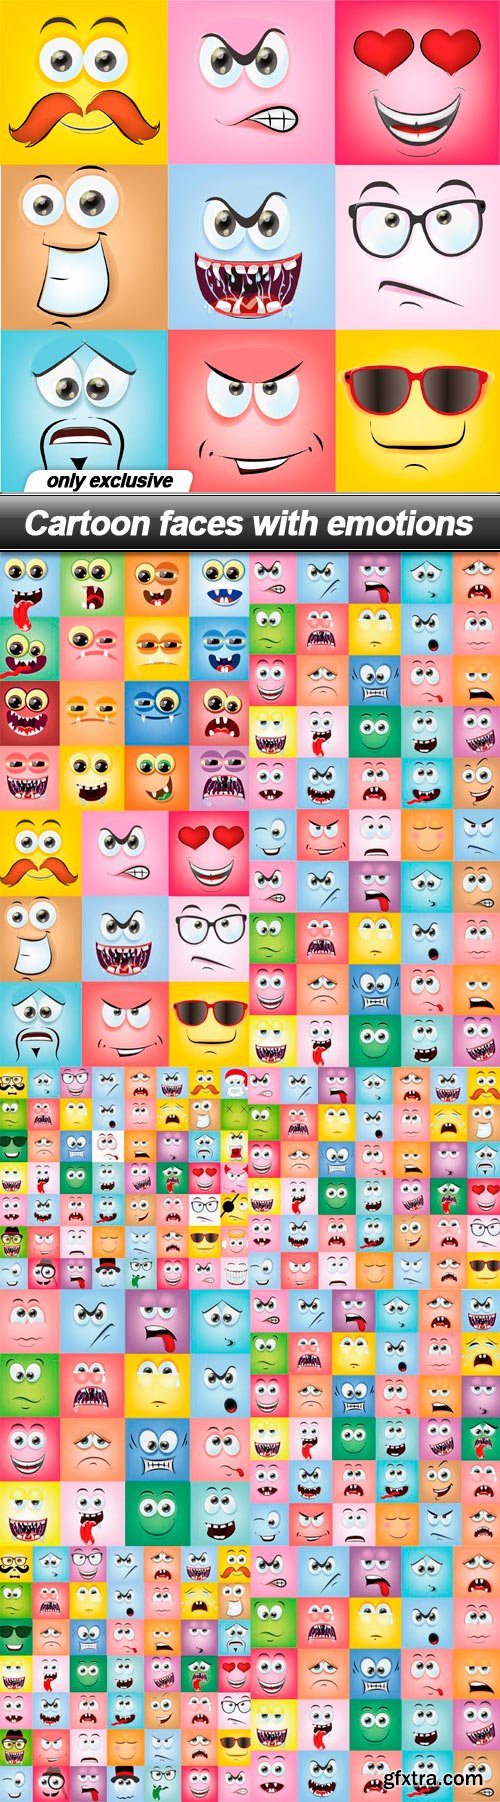 Cartoon faces with emotions - 10 UHQ JPEG